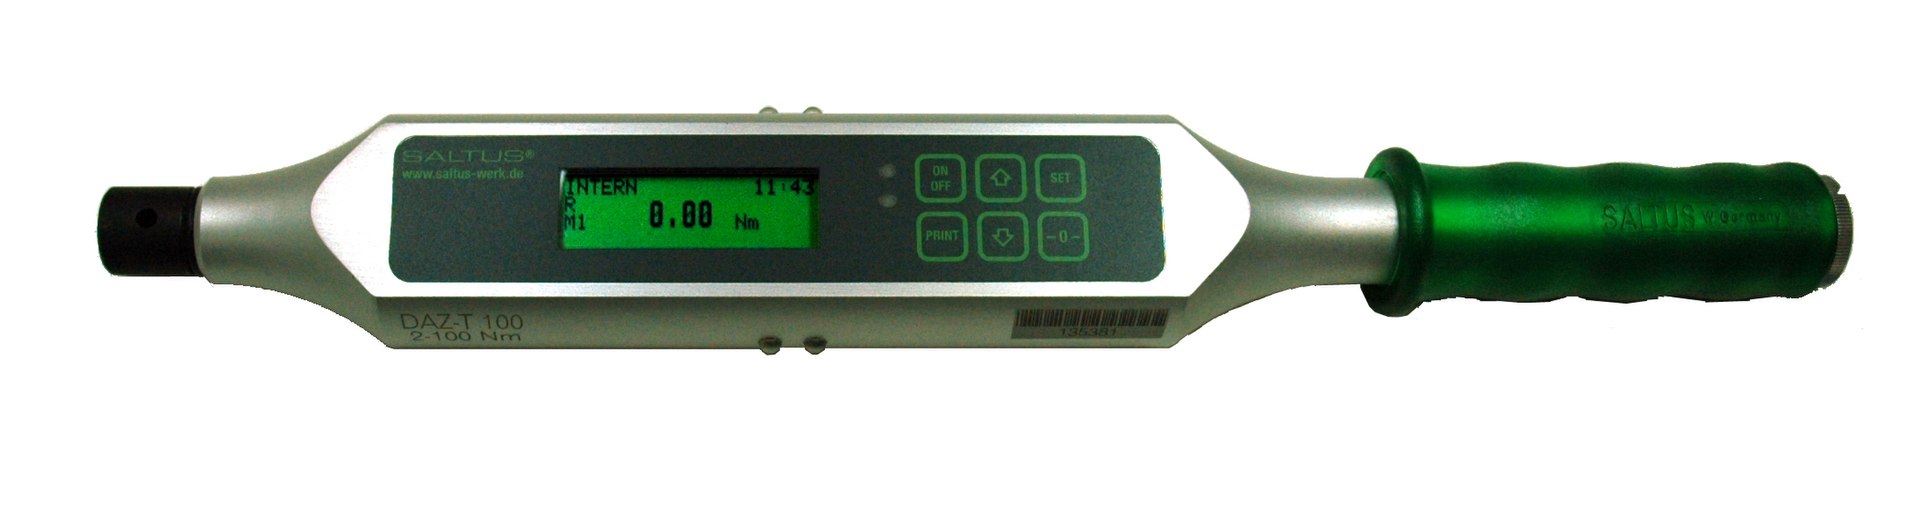 Electronic Torque Wrench image